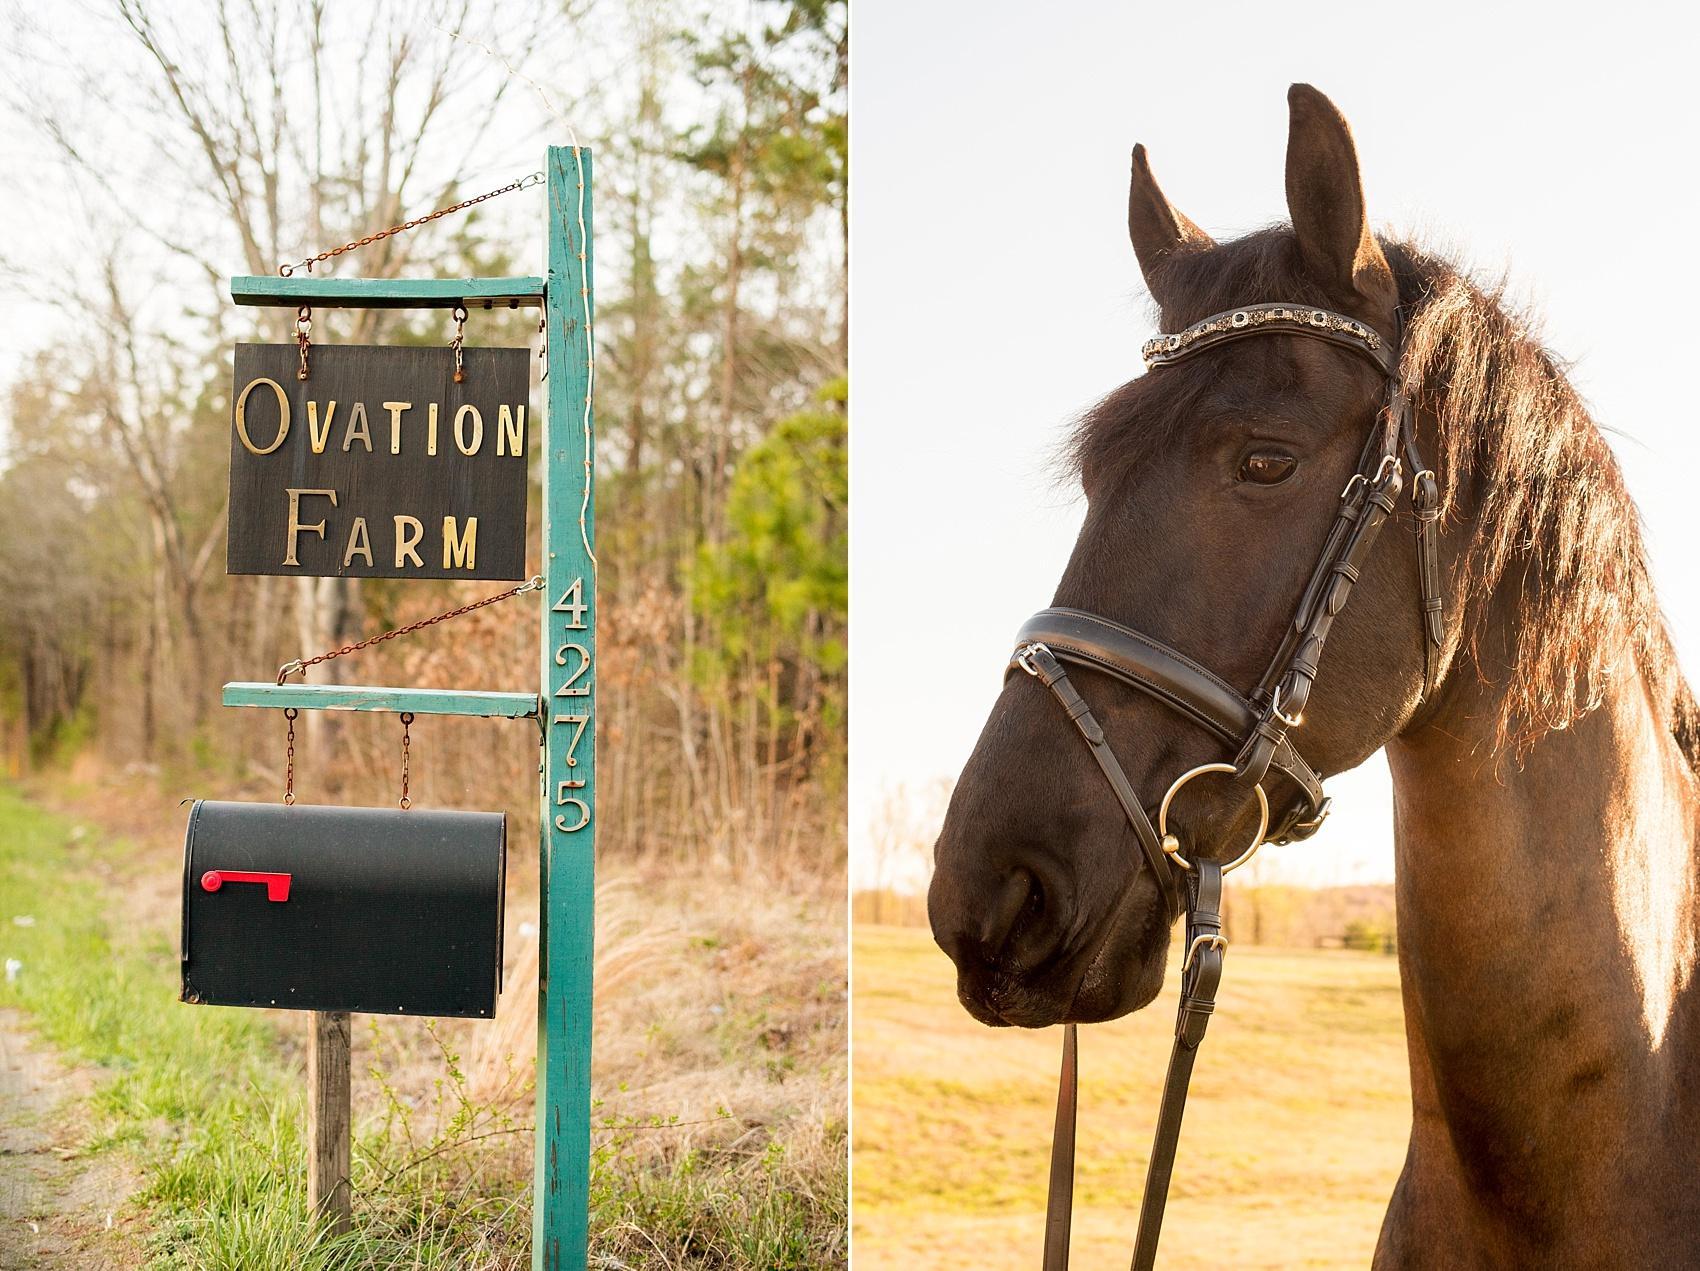 Raleigh engagement photos at Ovation Farm in Sanford by Mikkel Paige Photography. Farm sign and Pieter the brown horse completed the golden hour session.